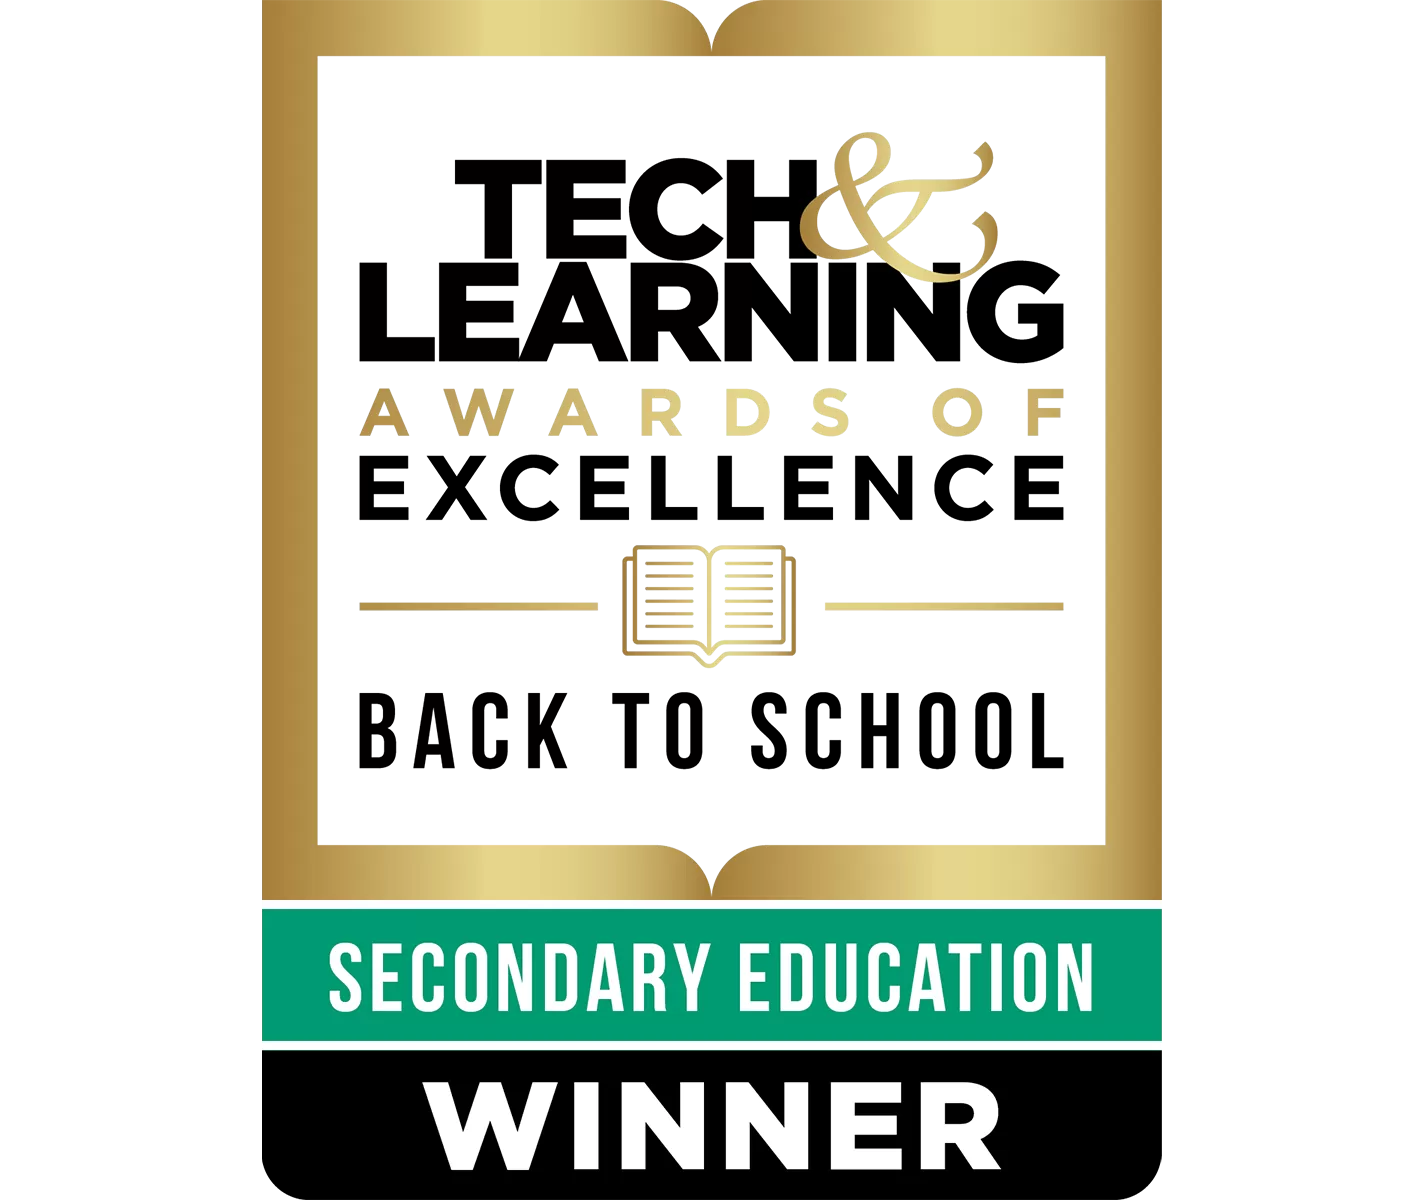 Teach & learning awards of excellence back to school secondary education winner badge